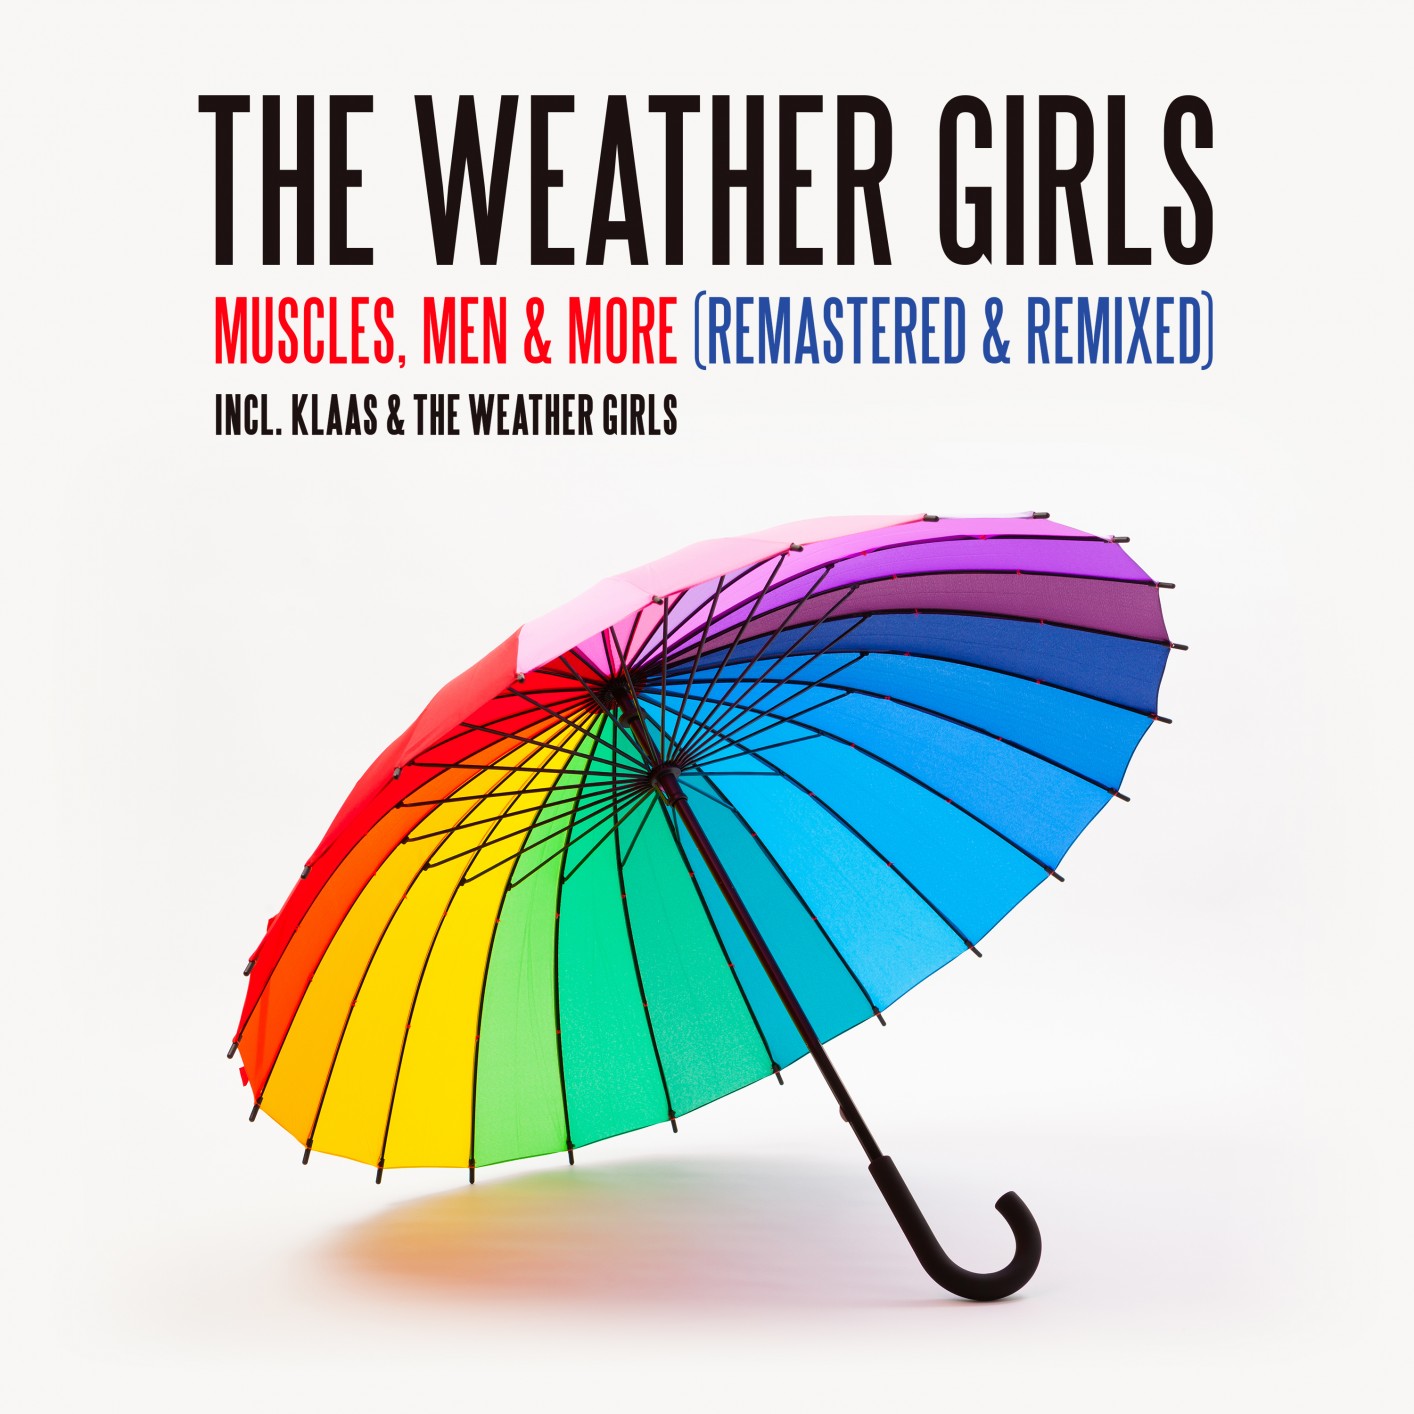 The Weather Girls – Muscles, Men & More (Remastered & Remixed) (2007/2020) [FLAC 24bit/44,1kHz]